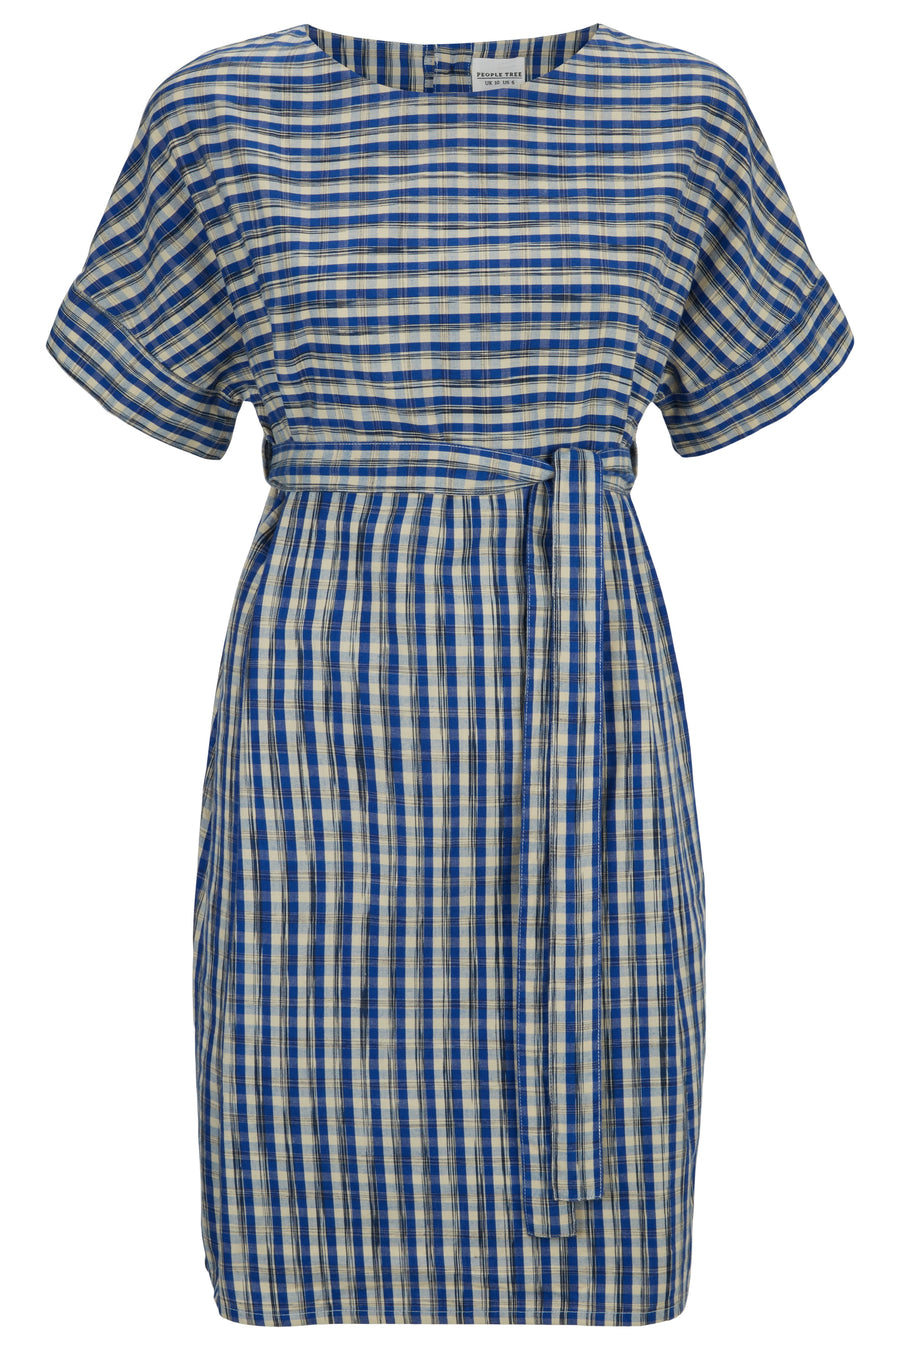 People Tree Fair Trade, Ethical & Sustainable Christabel Ikat Dress in Blue check 100% Organic Cotton